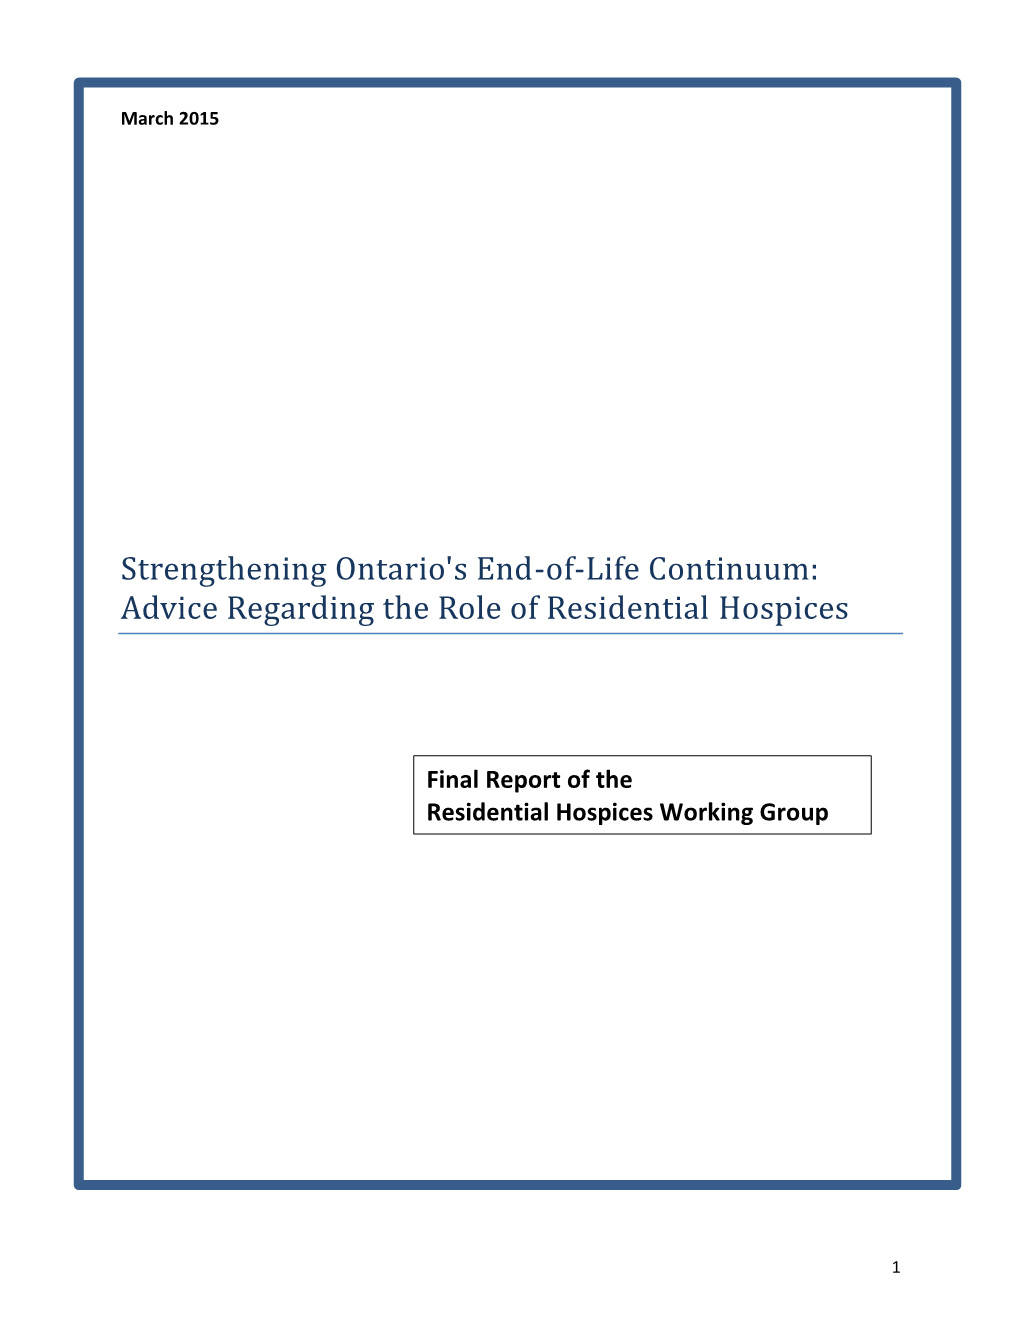 Strengthening Ontario's End-Of-Life Continuum: Advice Regarding the Role of Residential Hospices